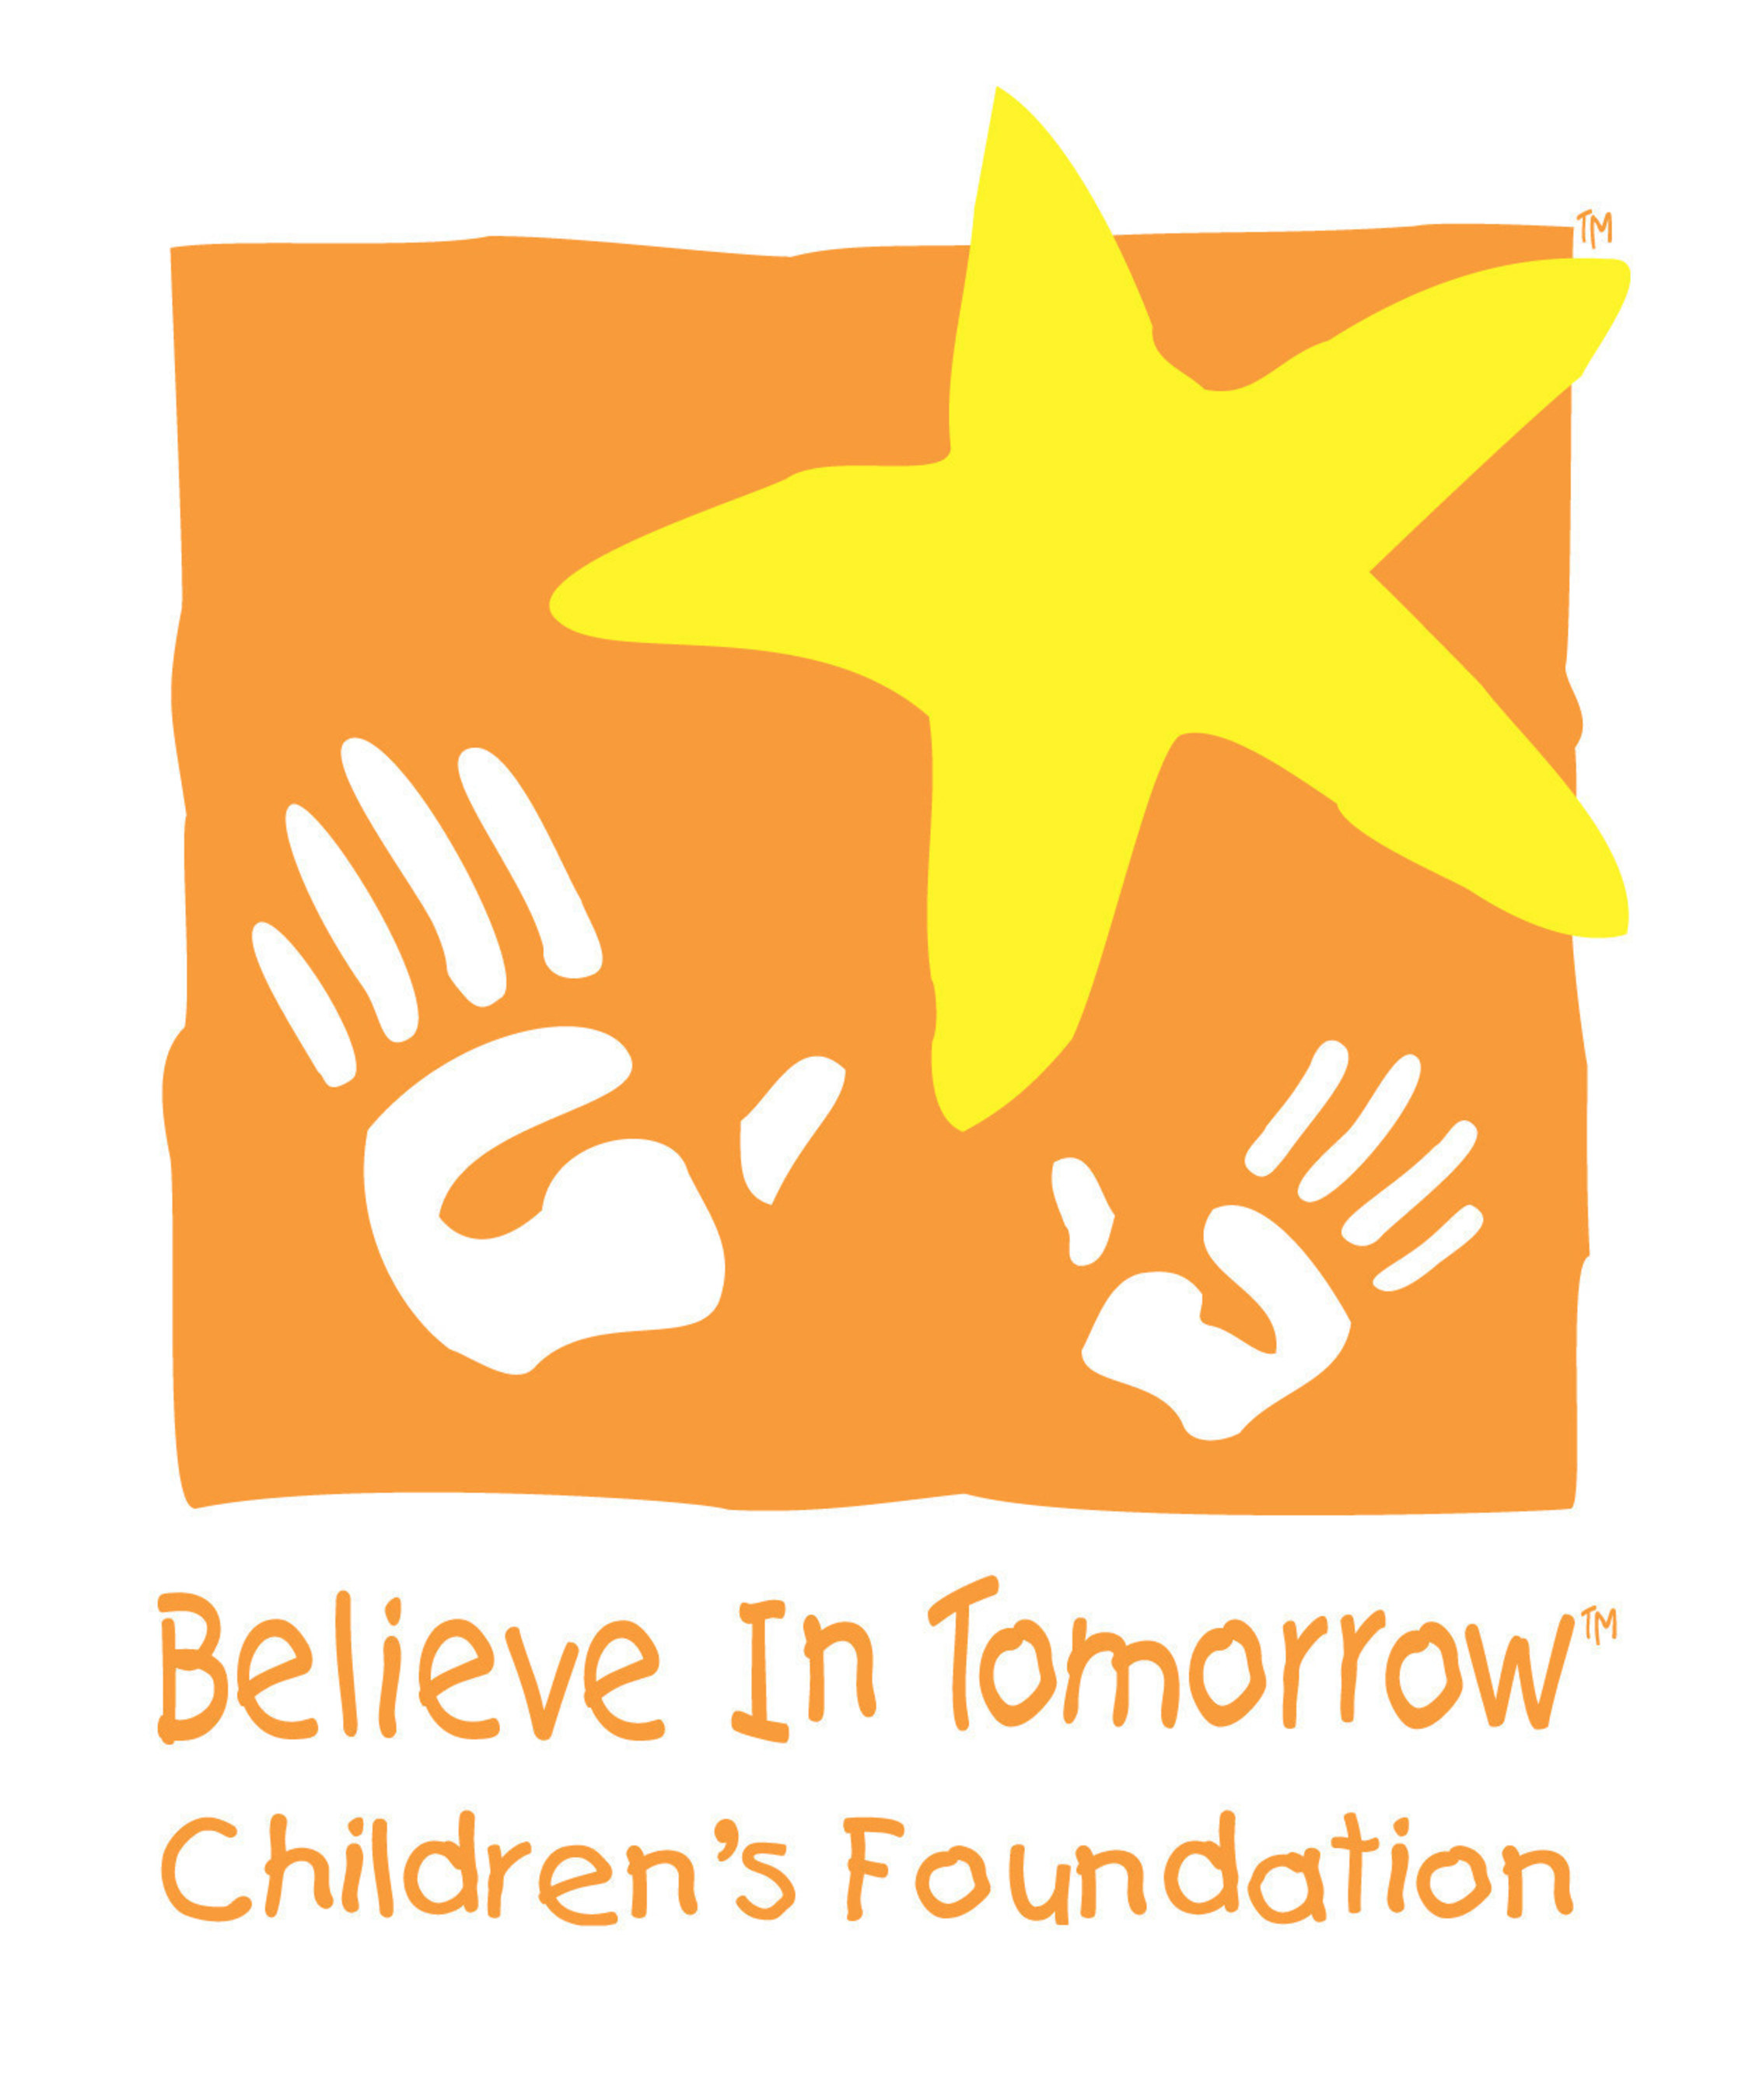 Maryland Governor Hogan to Visit Critically Ill Children at the Believe in Tomorrow Children's House by the Sea